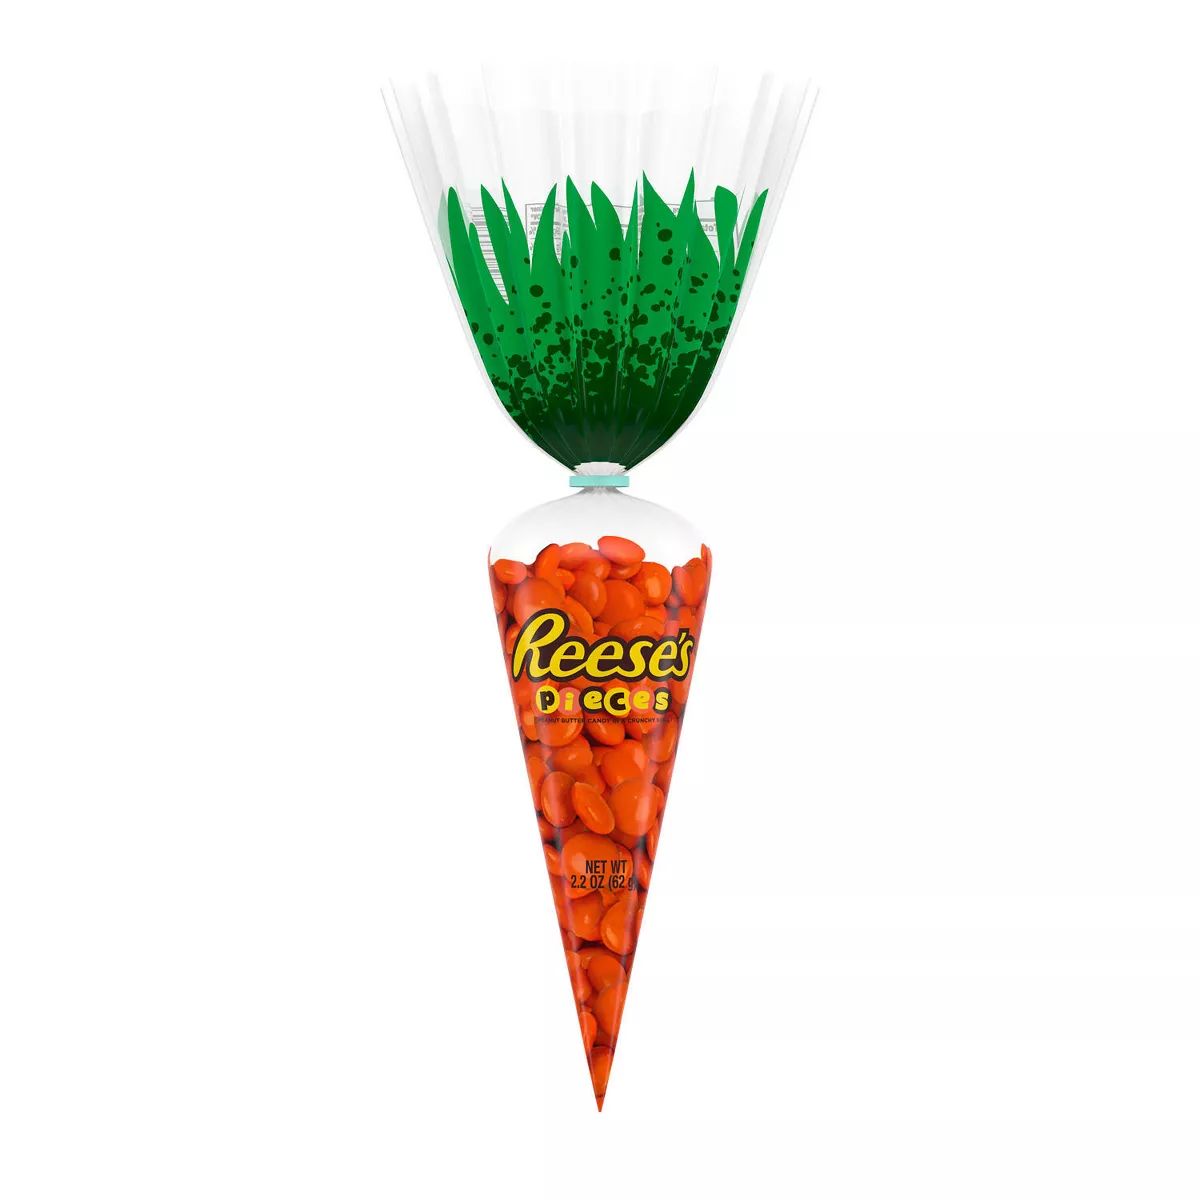 Reese's Pieces Peanut Butter Easter Candy Gift Bag - 2.2oz | Target